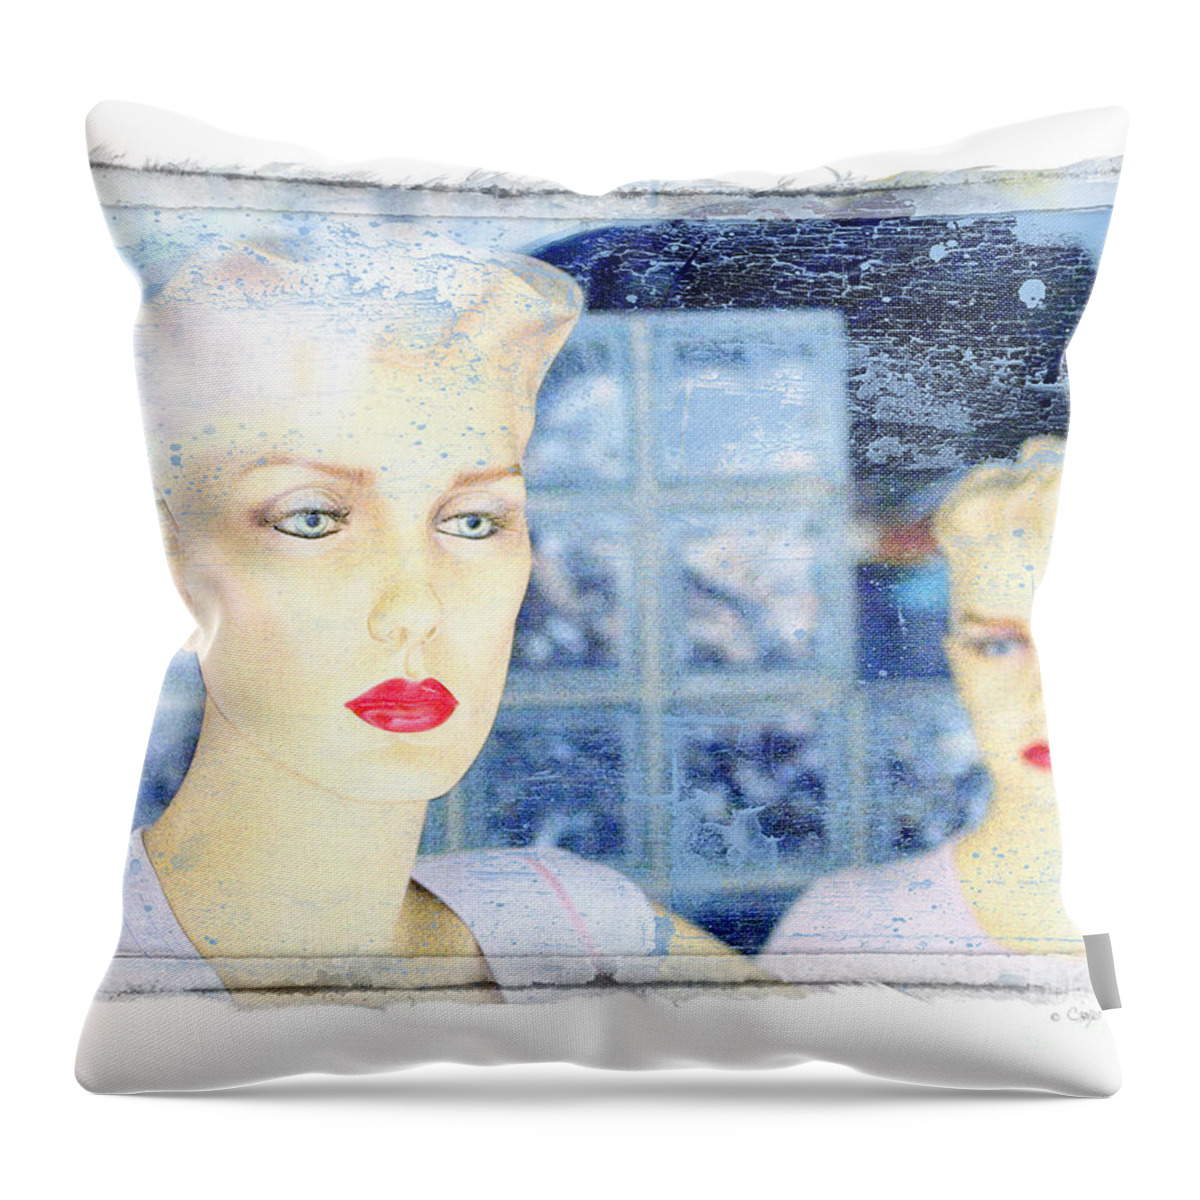 Angel Throw Pillow featuring the photograph Two 40's Models by Craig J Satterlee